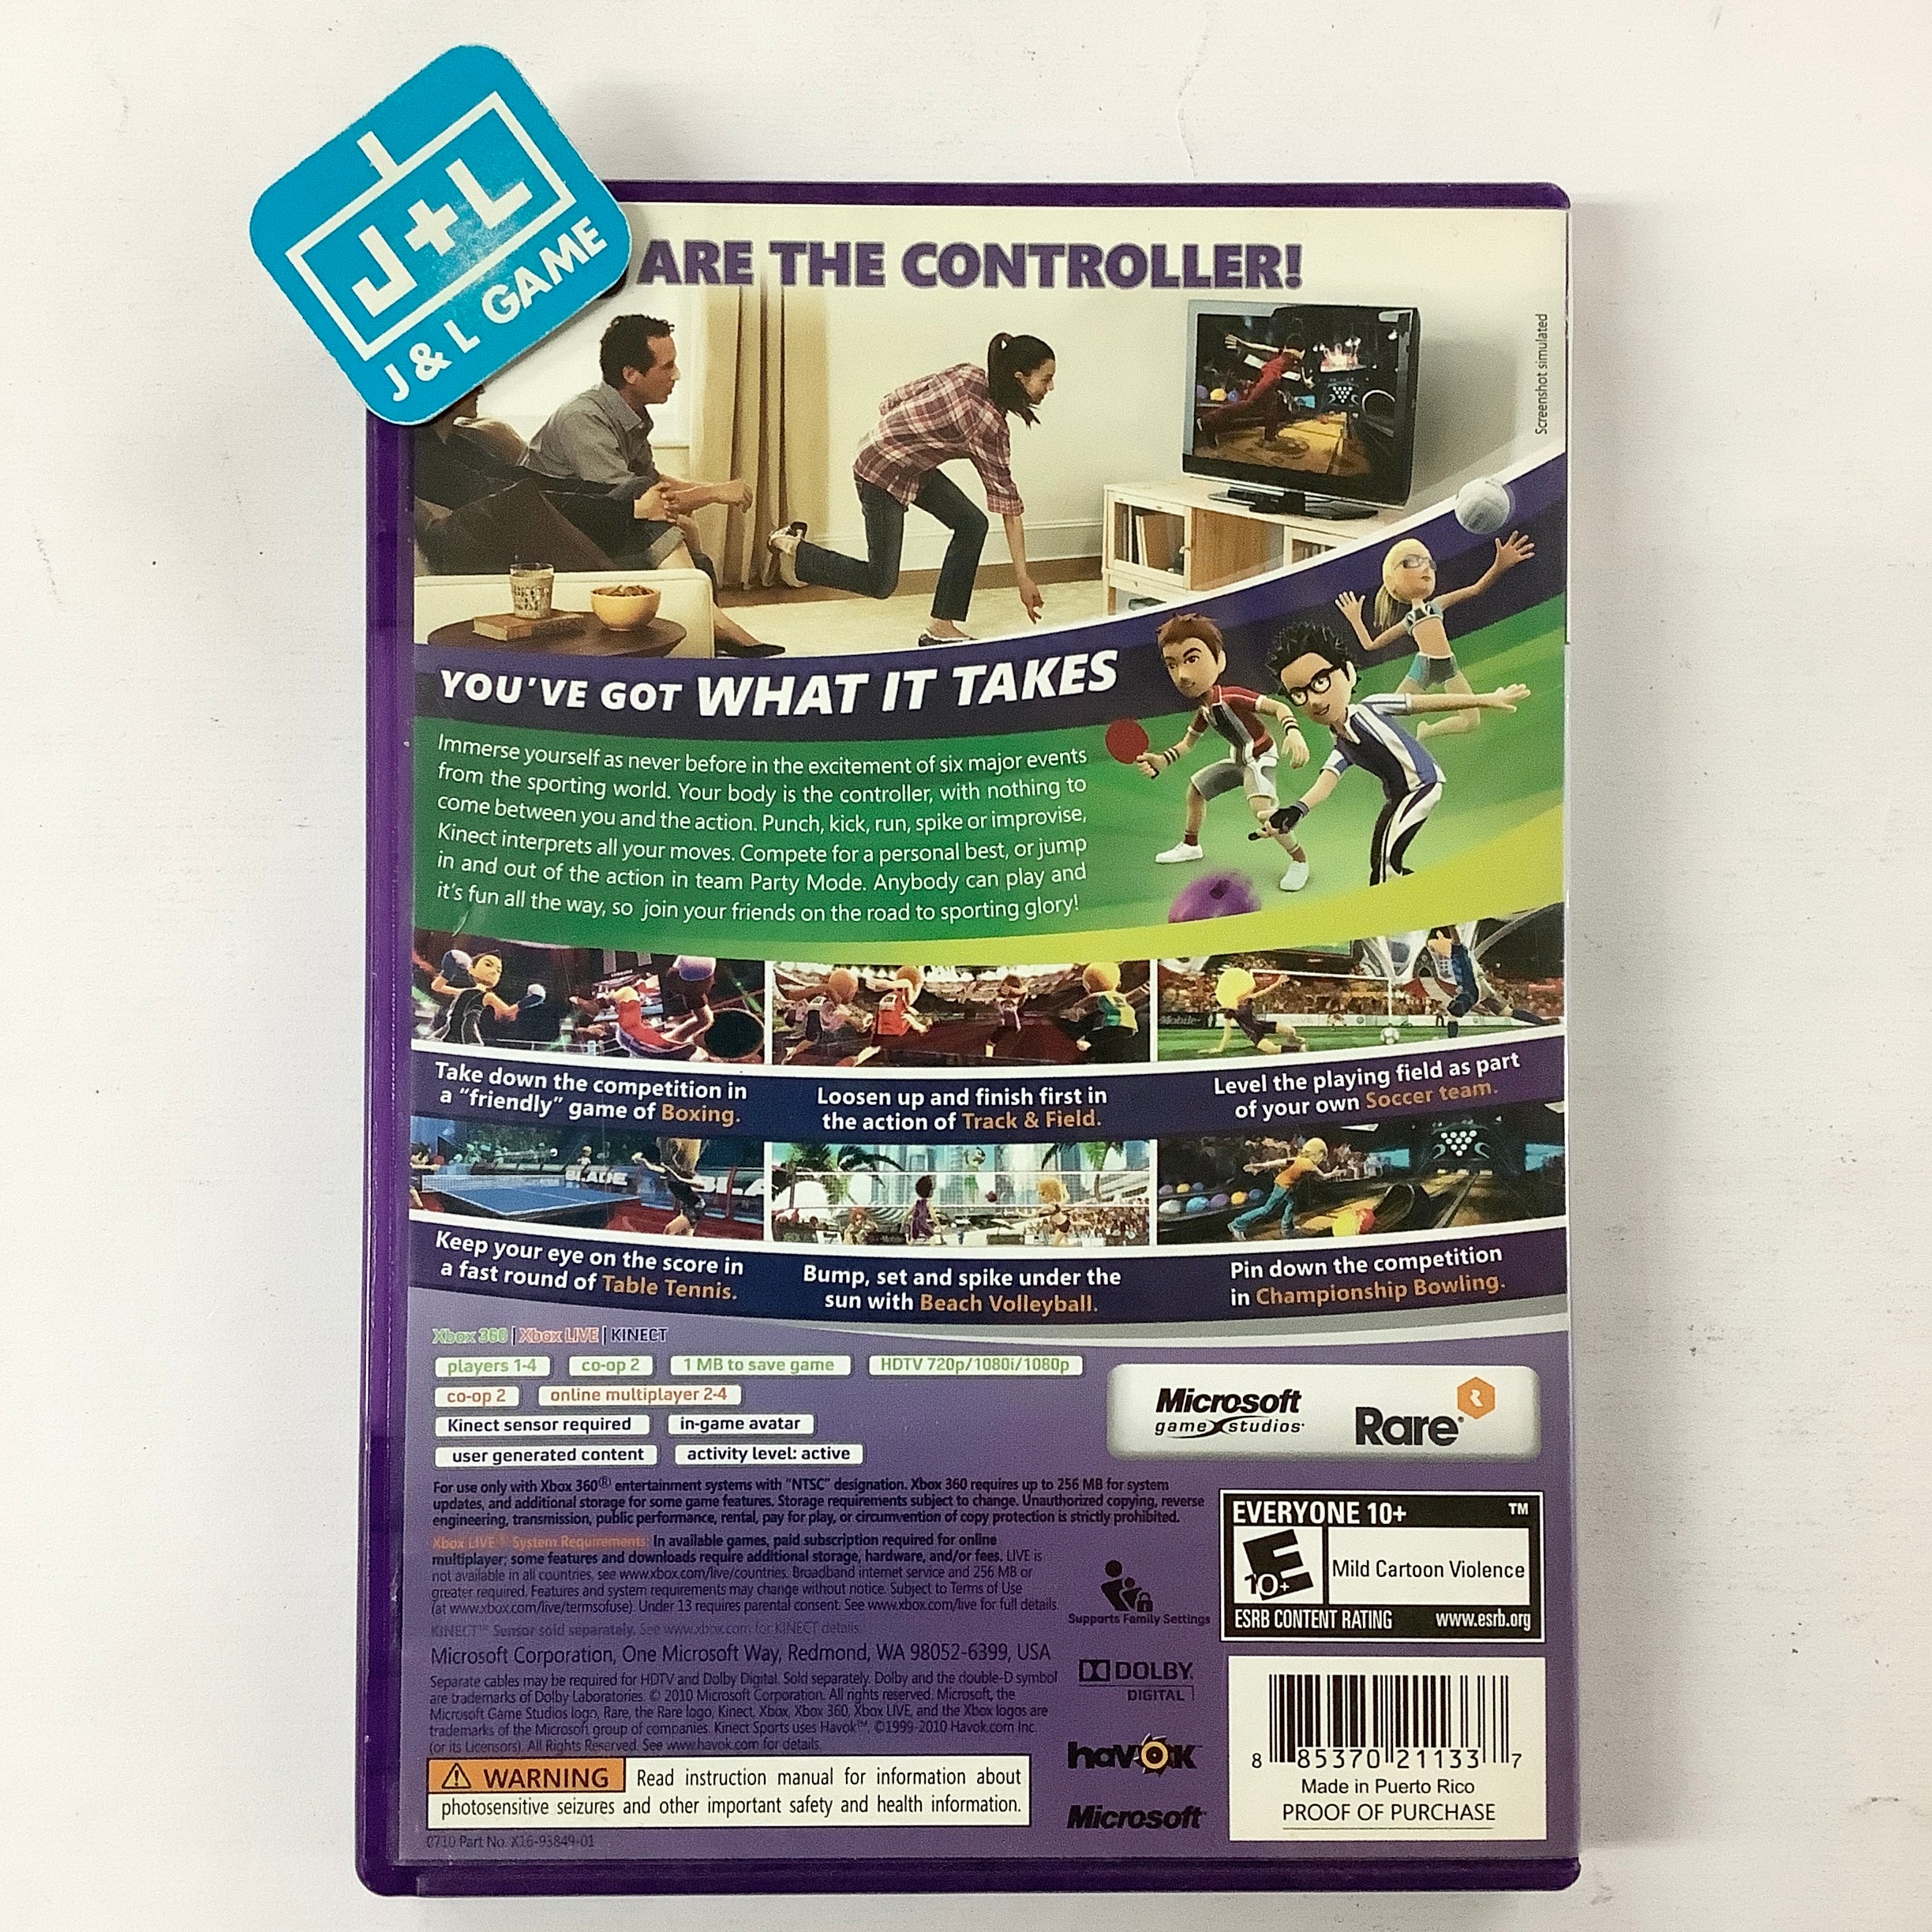 Kinect Sports (Kinect Required) - Xbox 360 [Pre-Owned] Video Games Microsoft Game Studios   